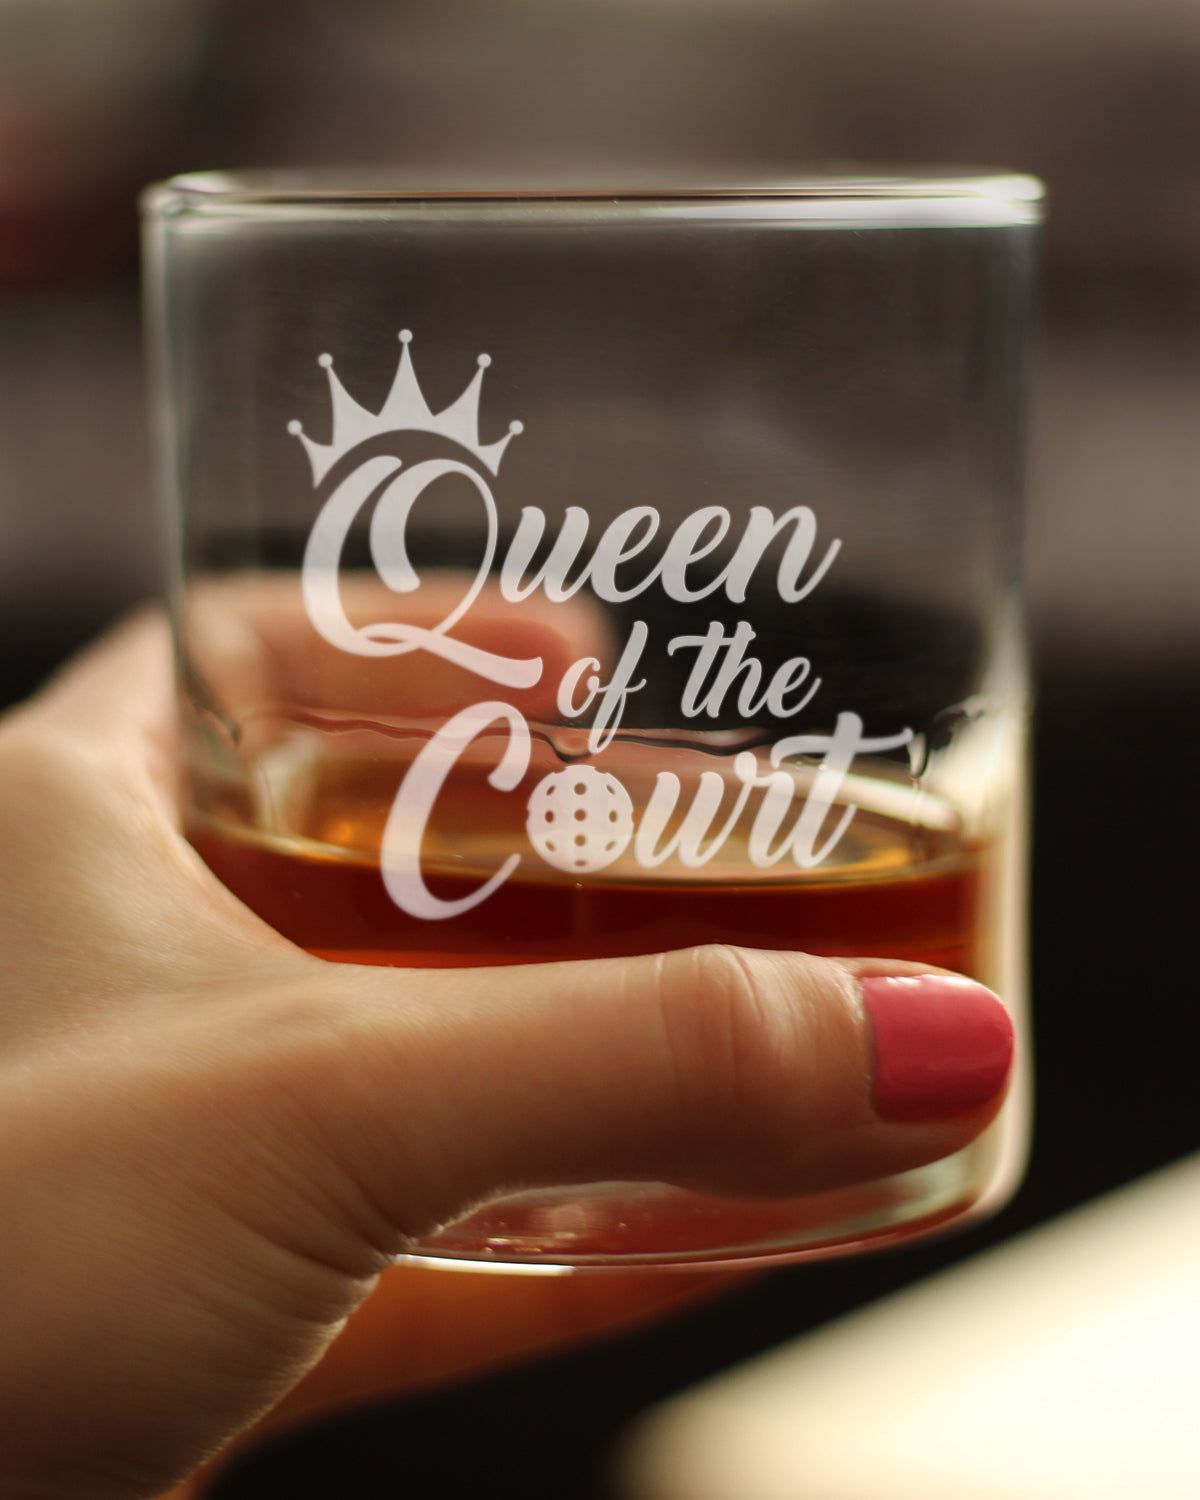 Queen of the Court - Whiskey Rocks Glass - Funny Pickleball Themed Decor and Gifts - 10.25 Oz Glasses